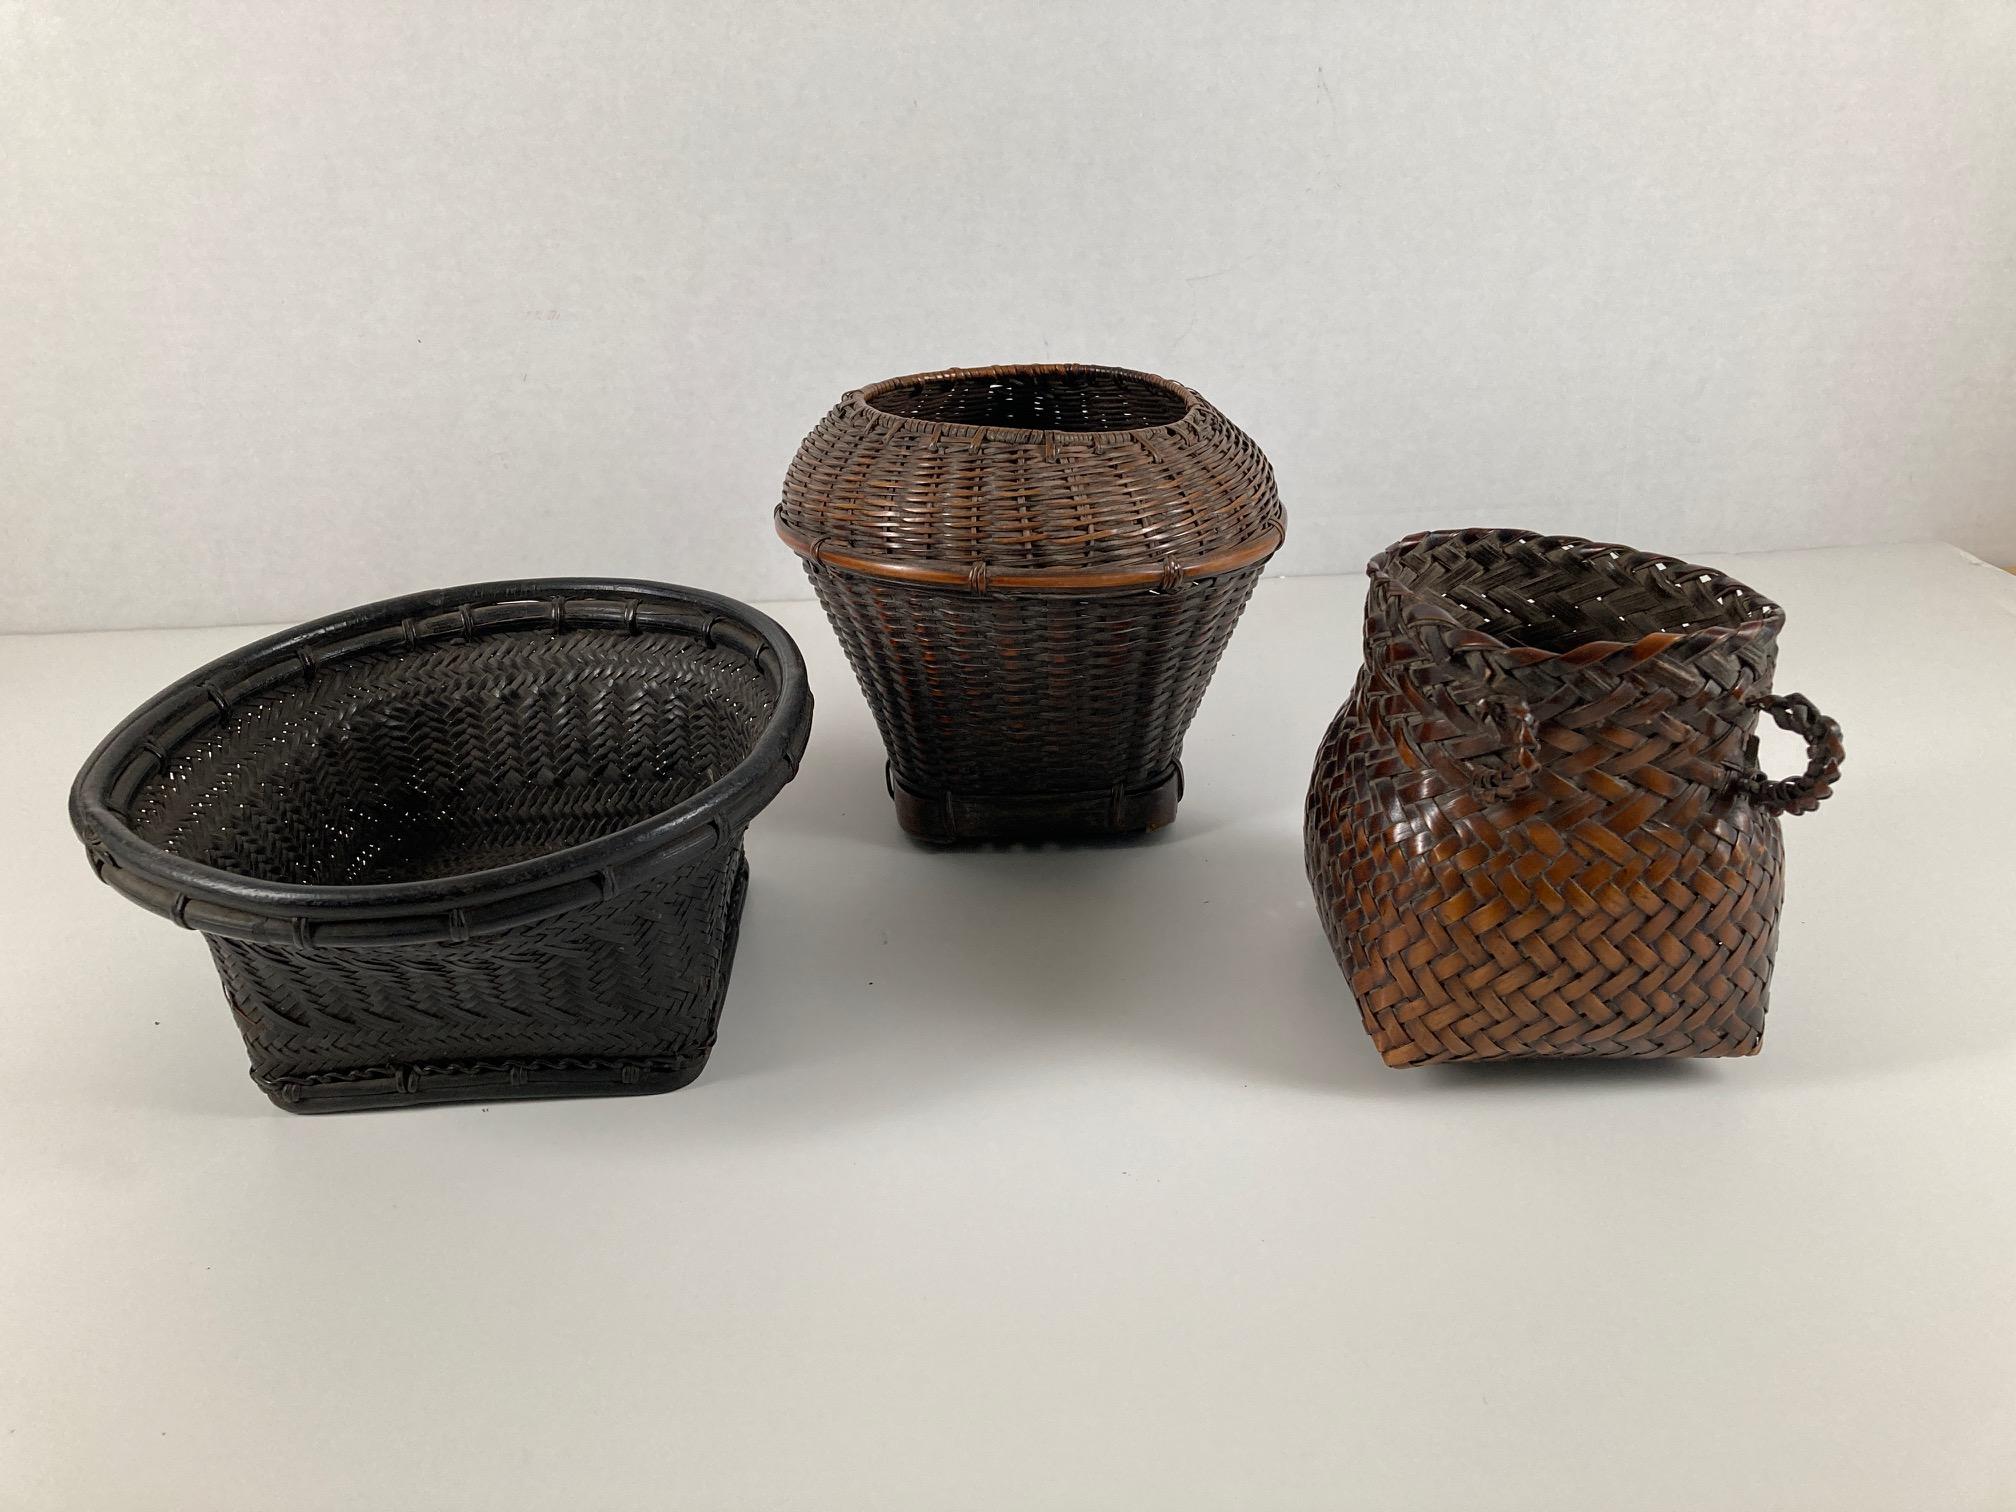 Set of 3 old Northern Philippines (Luzon area) storage and seed baskets. From the private collection of a retired ship's captain who traveled to the Philippines and collected native artifacts for over 40 years. Round tops and square bottoms. All in